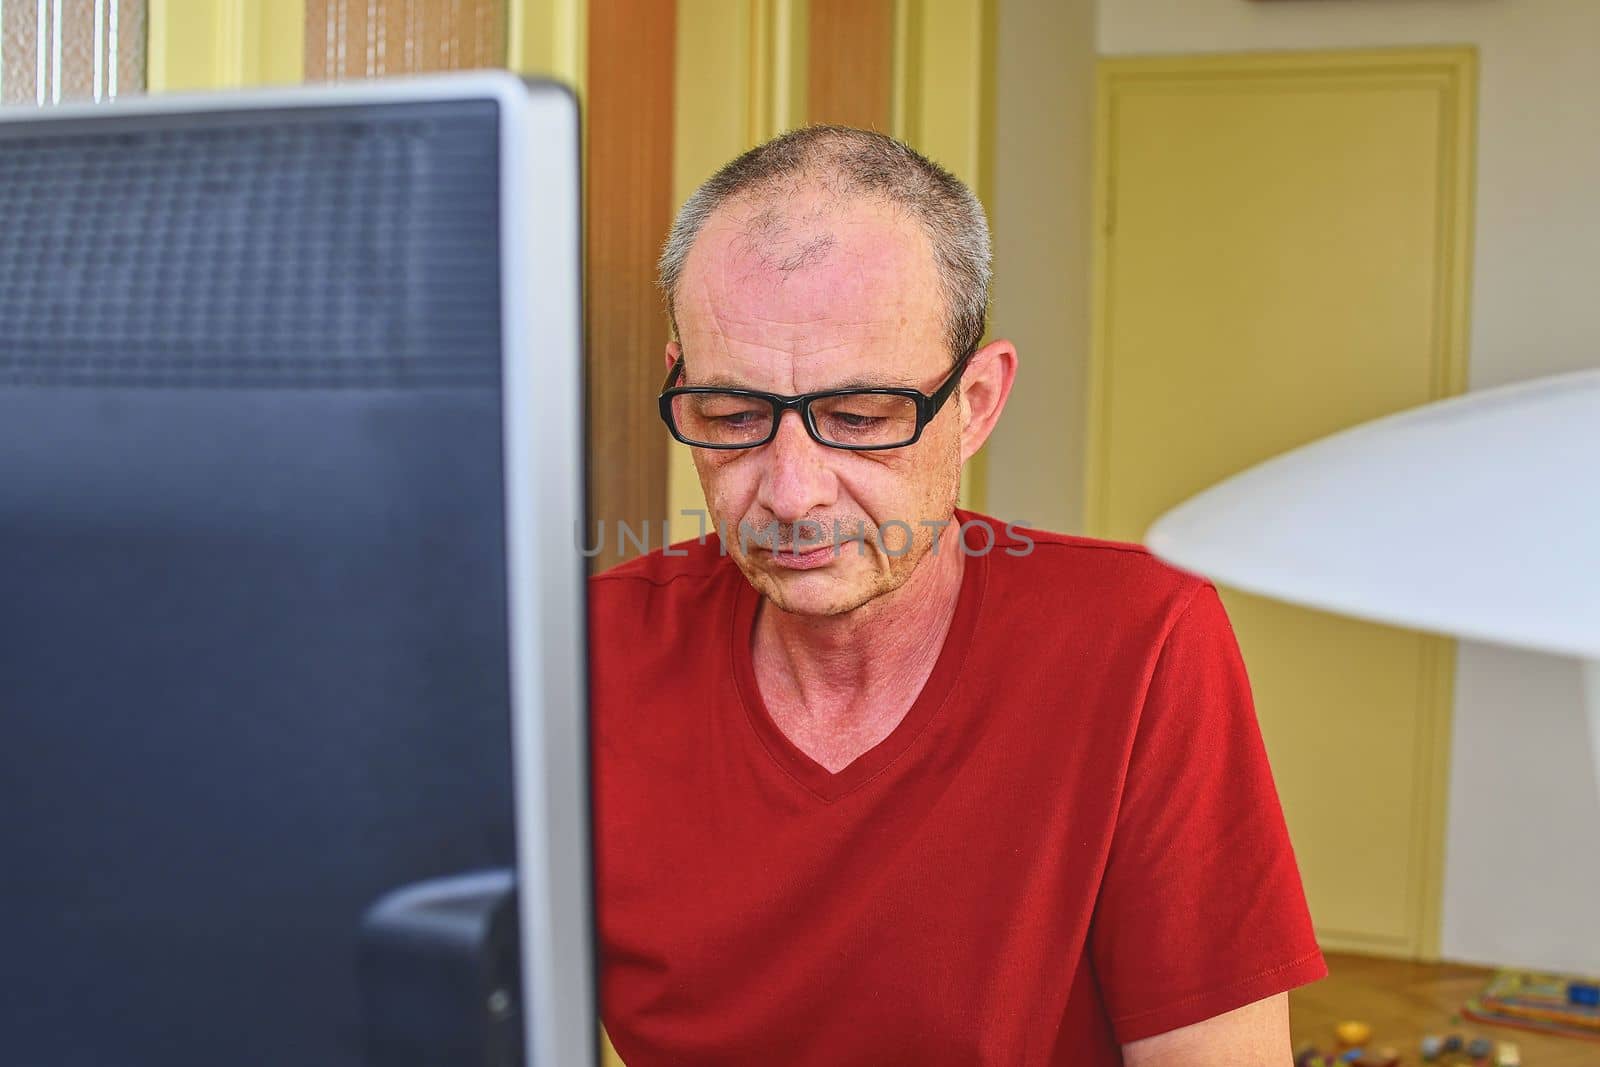 Middle aged man with glasses sitting at desk. Mature man using personal computer. Senior concept.  Man  working at home office. 